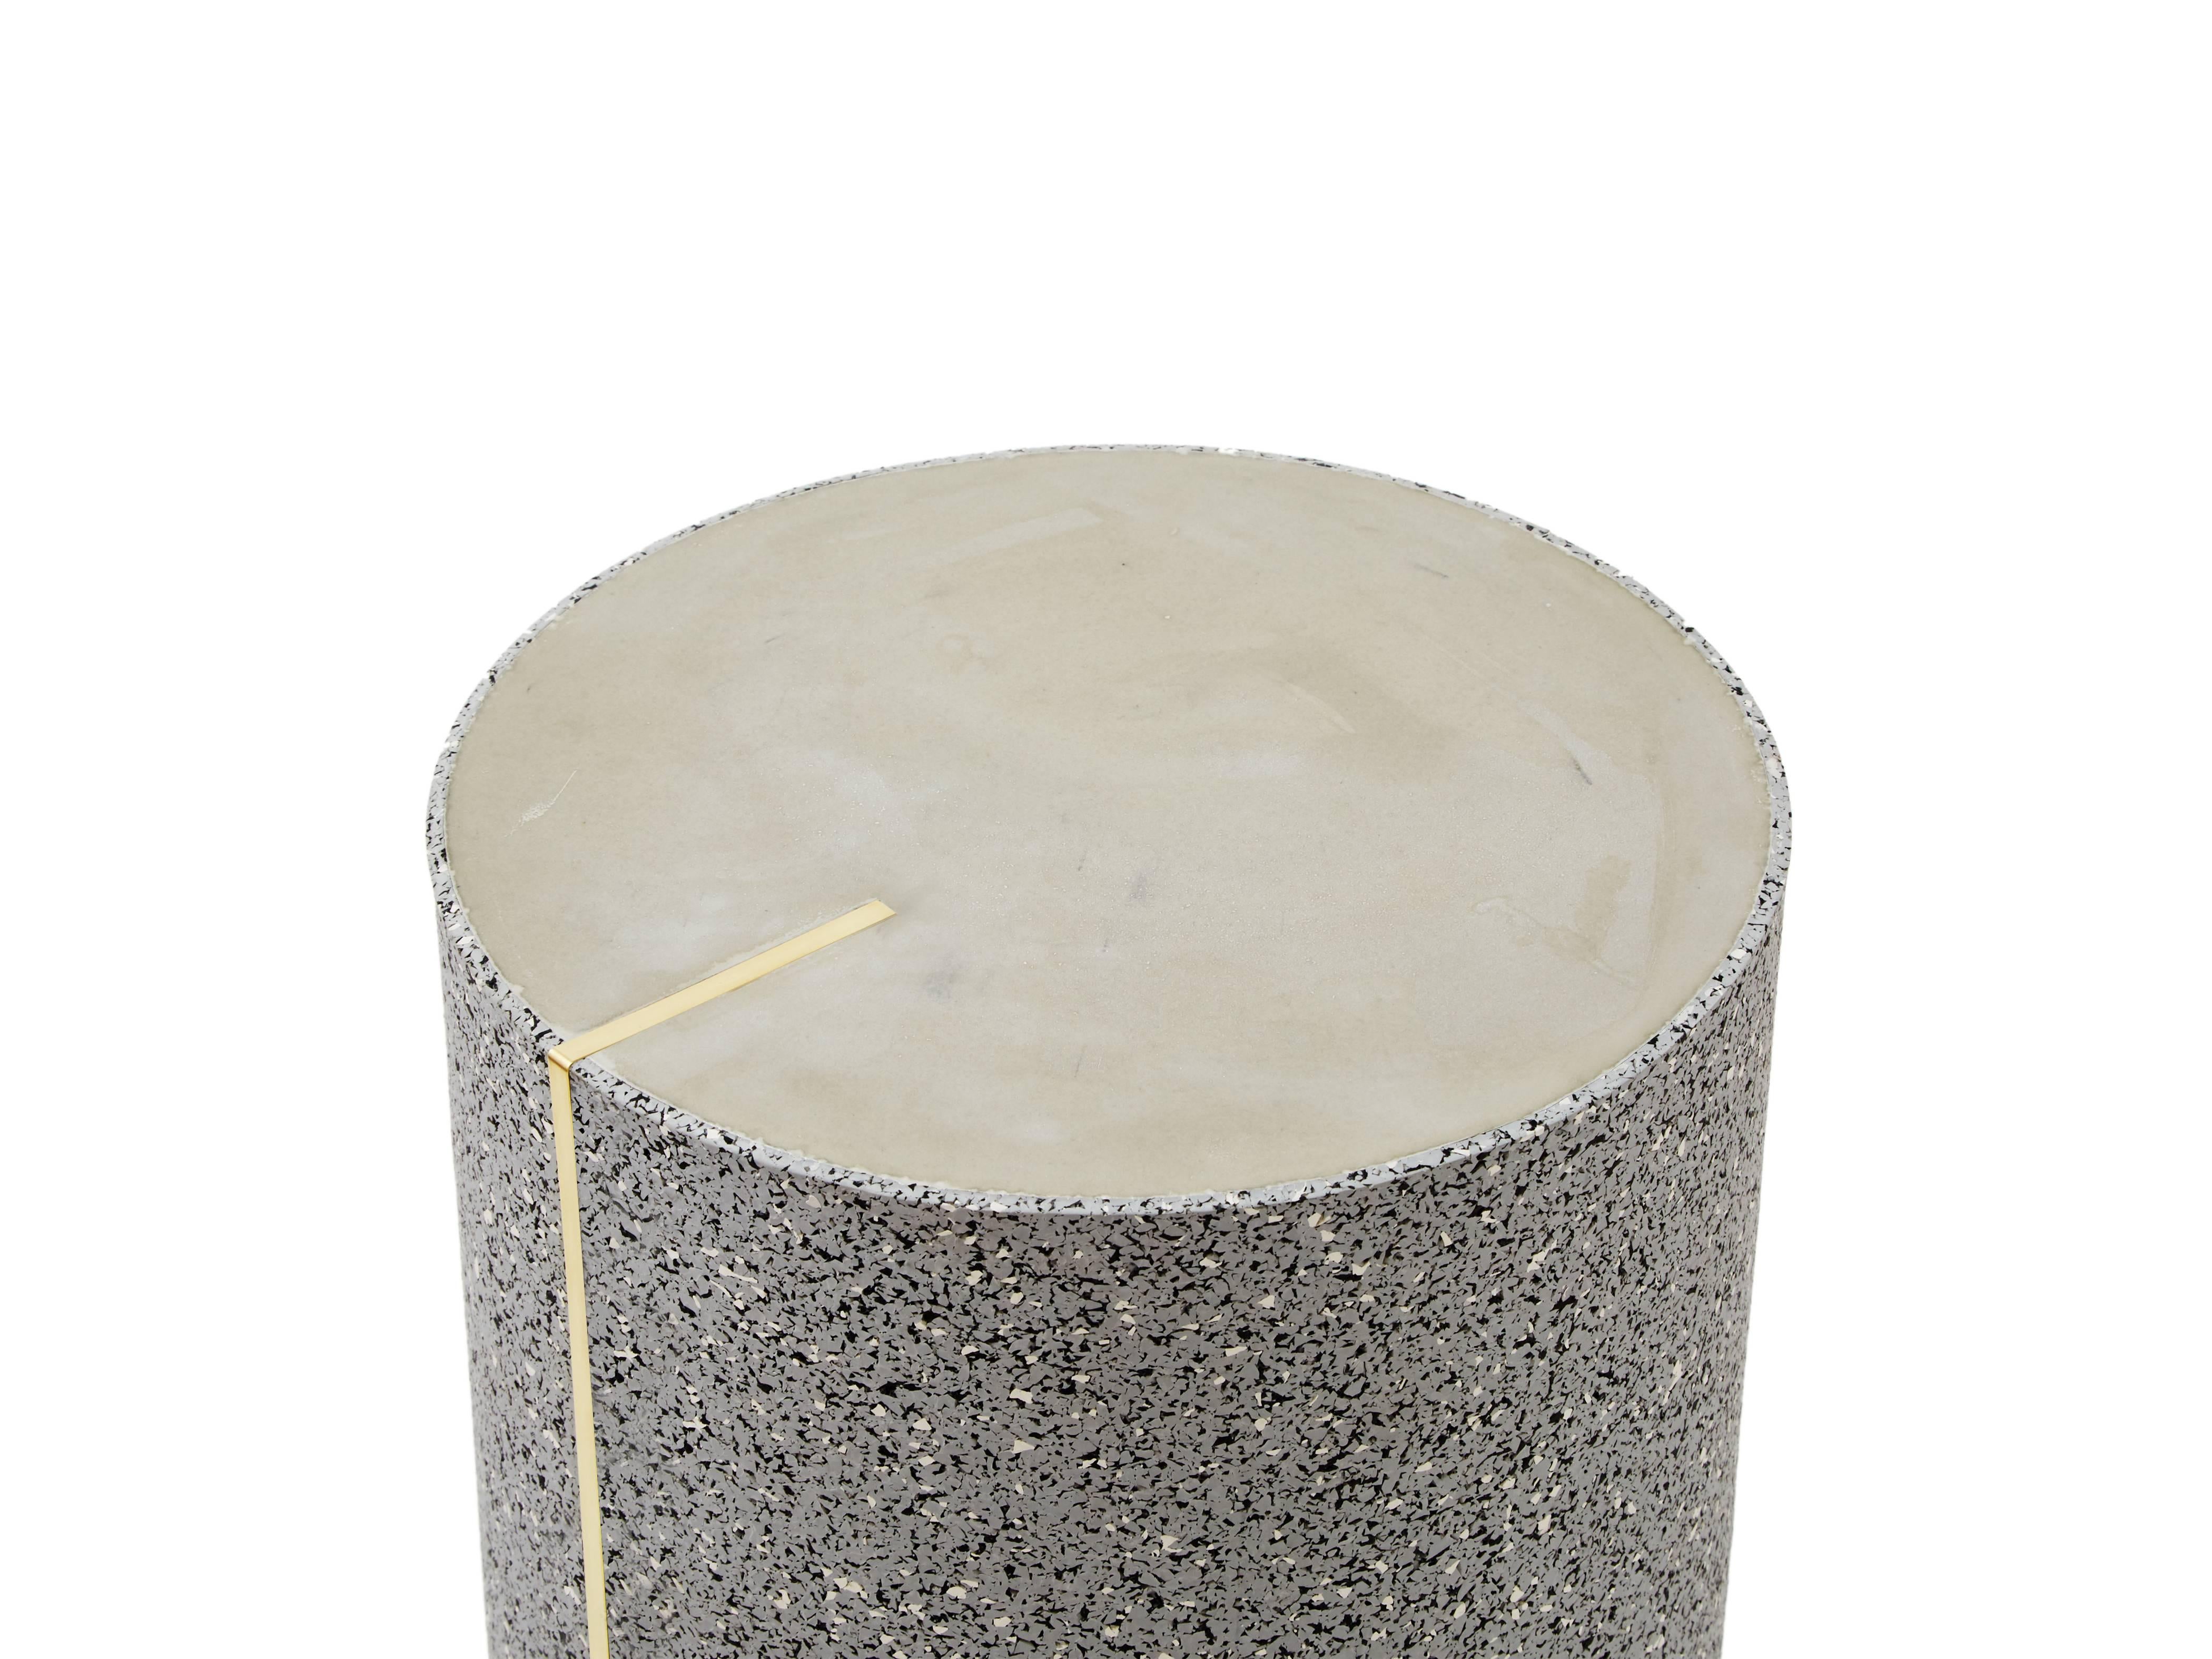 Rubber and concrete side table with a brass inlay created by Slash Objects

Materials: Rubber exterior in gris, concrete surface, brass inlay.

Dimensions: 12/18 inches.
 